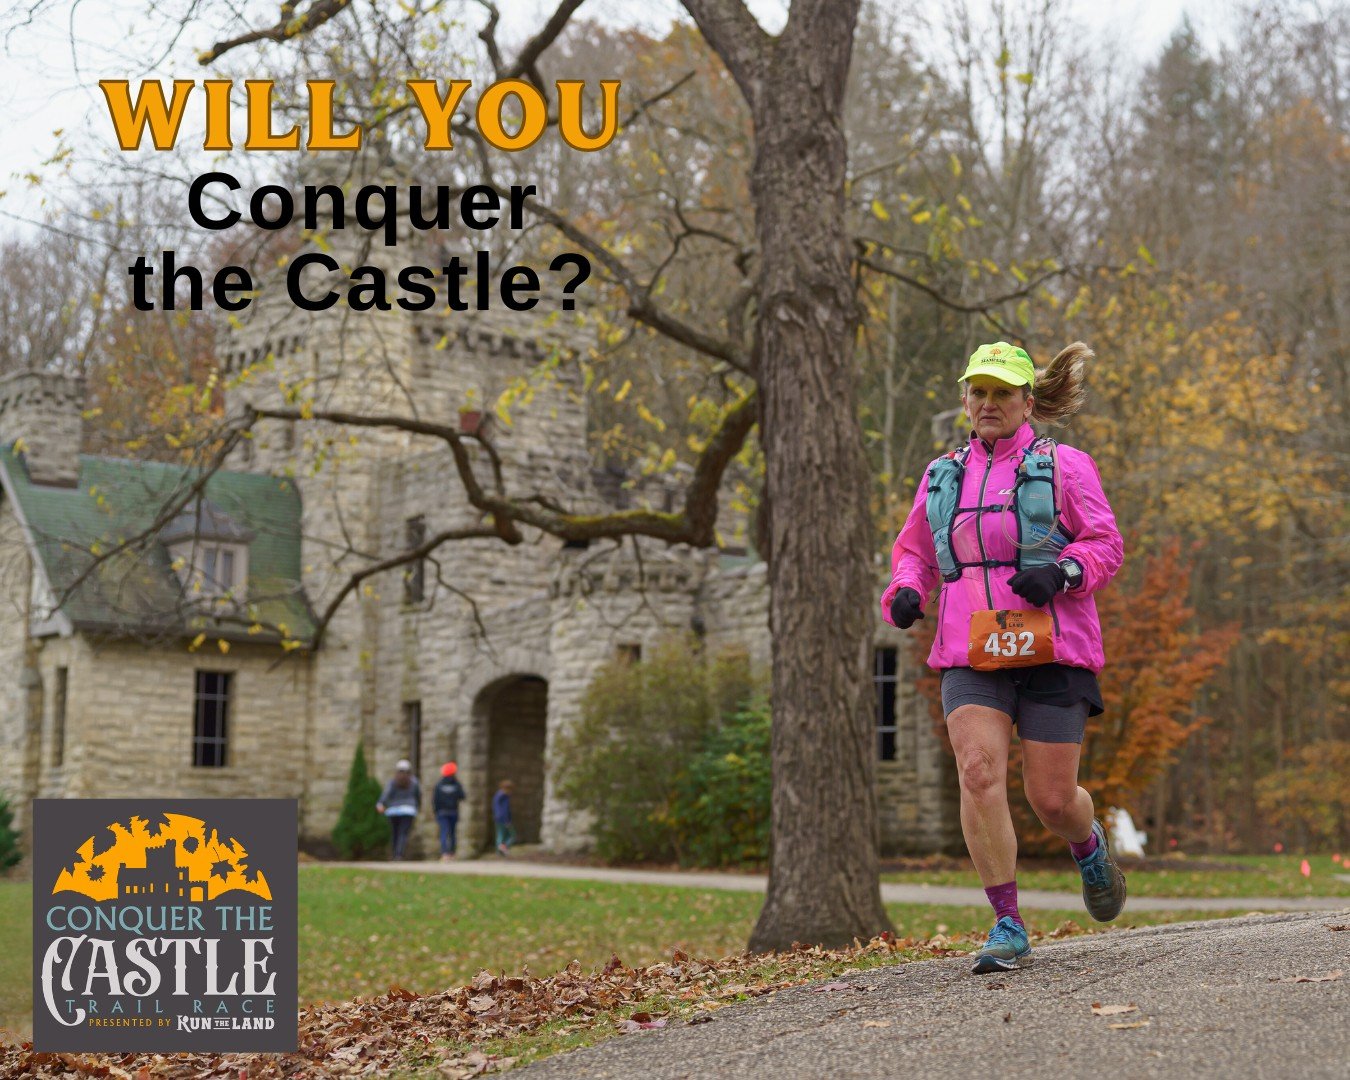 It's never too early to start thinking BIG and set your goals for a 100K this fall at Conquer the Castle!🏰

There are not many 100K racing options in Ohio, so if you are looking for a challenge to conquer this fall, then set yourself up for the 100K